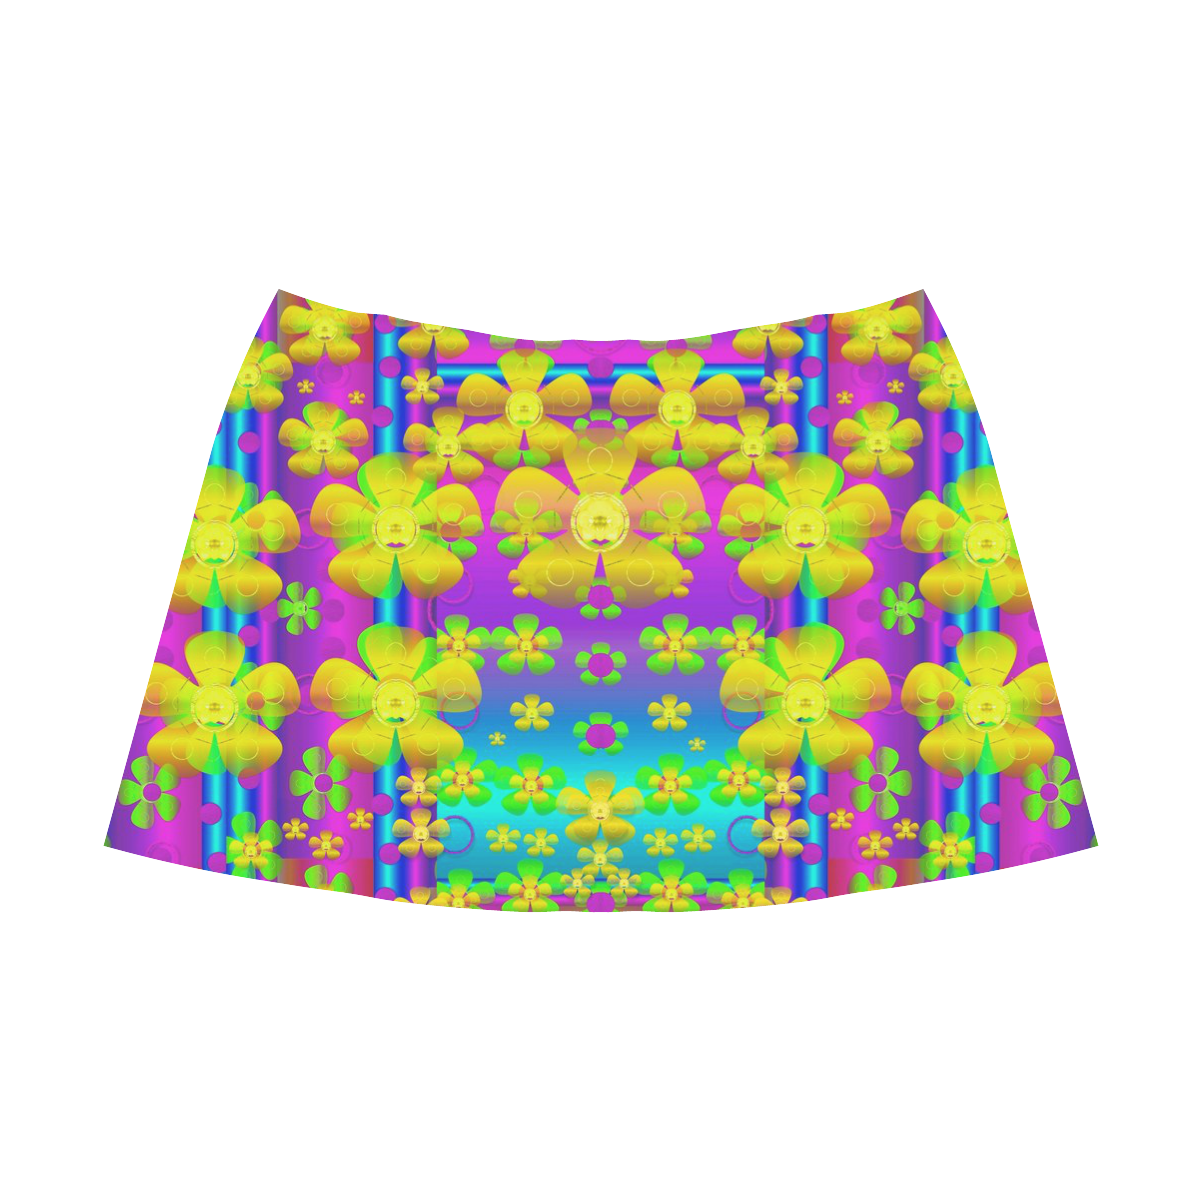 Outside the curtain it is peace florals and love Mnemosyne Women's Crepe Skirt (Model D16)